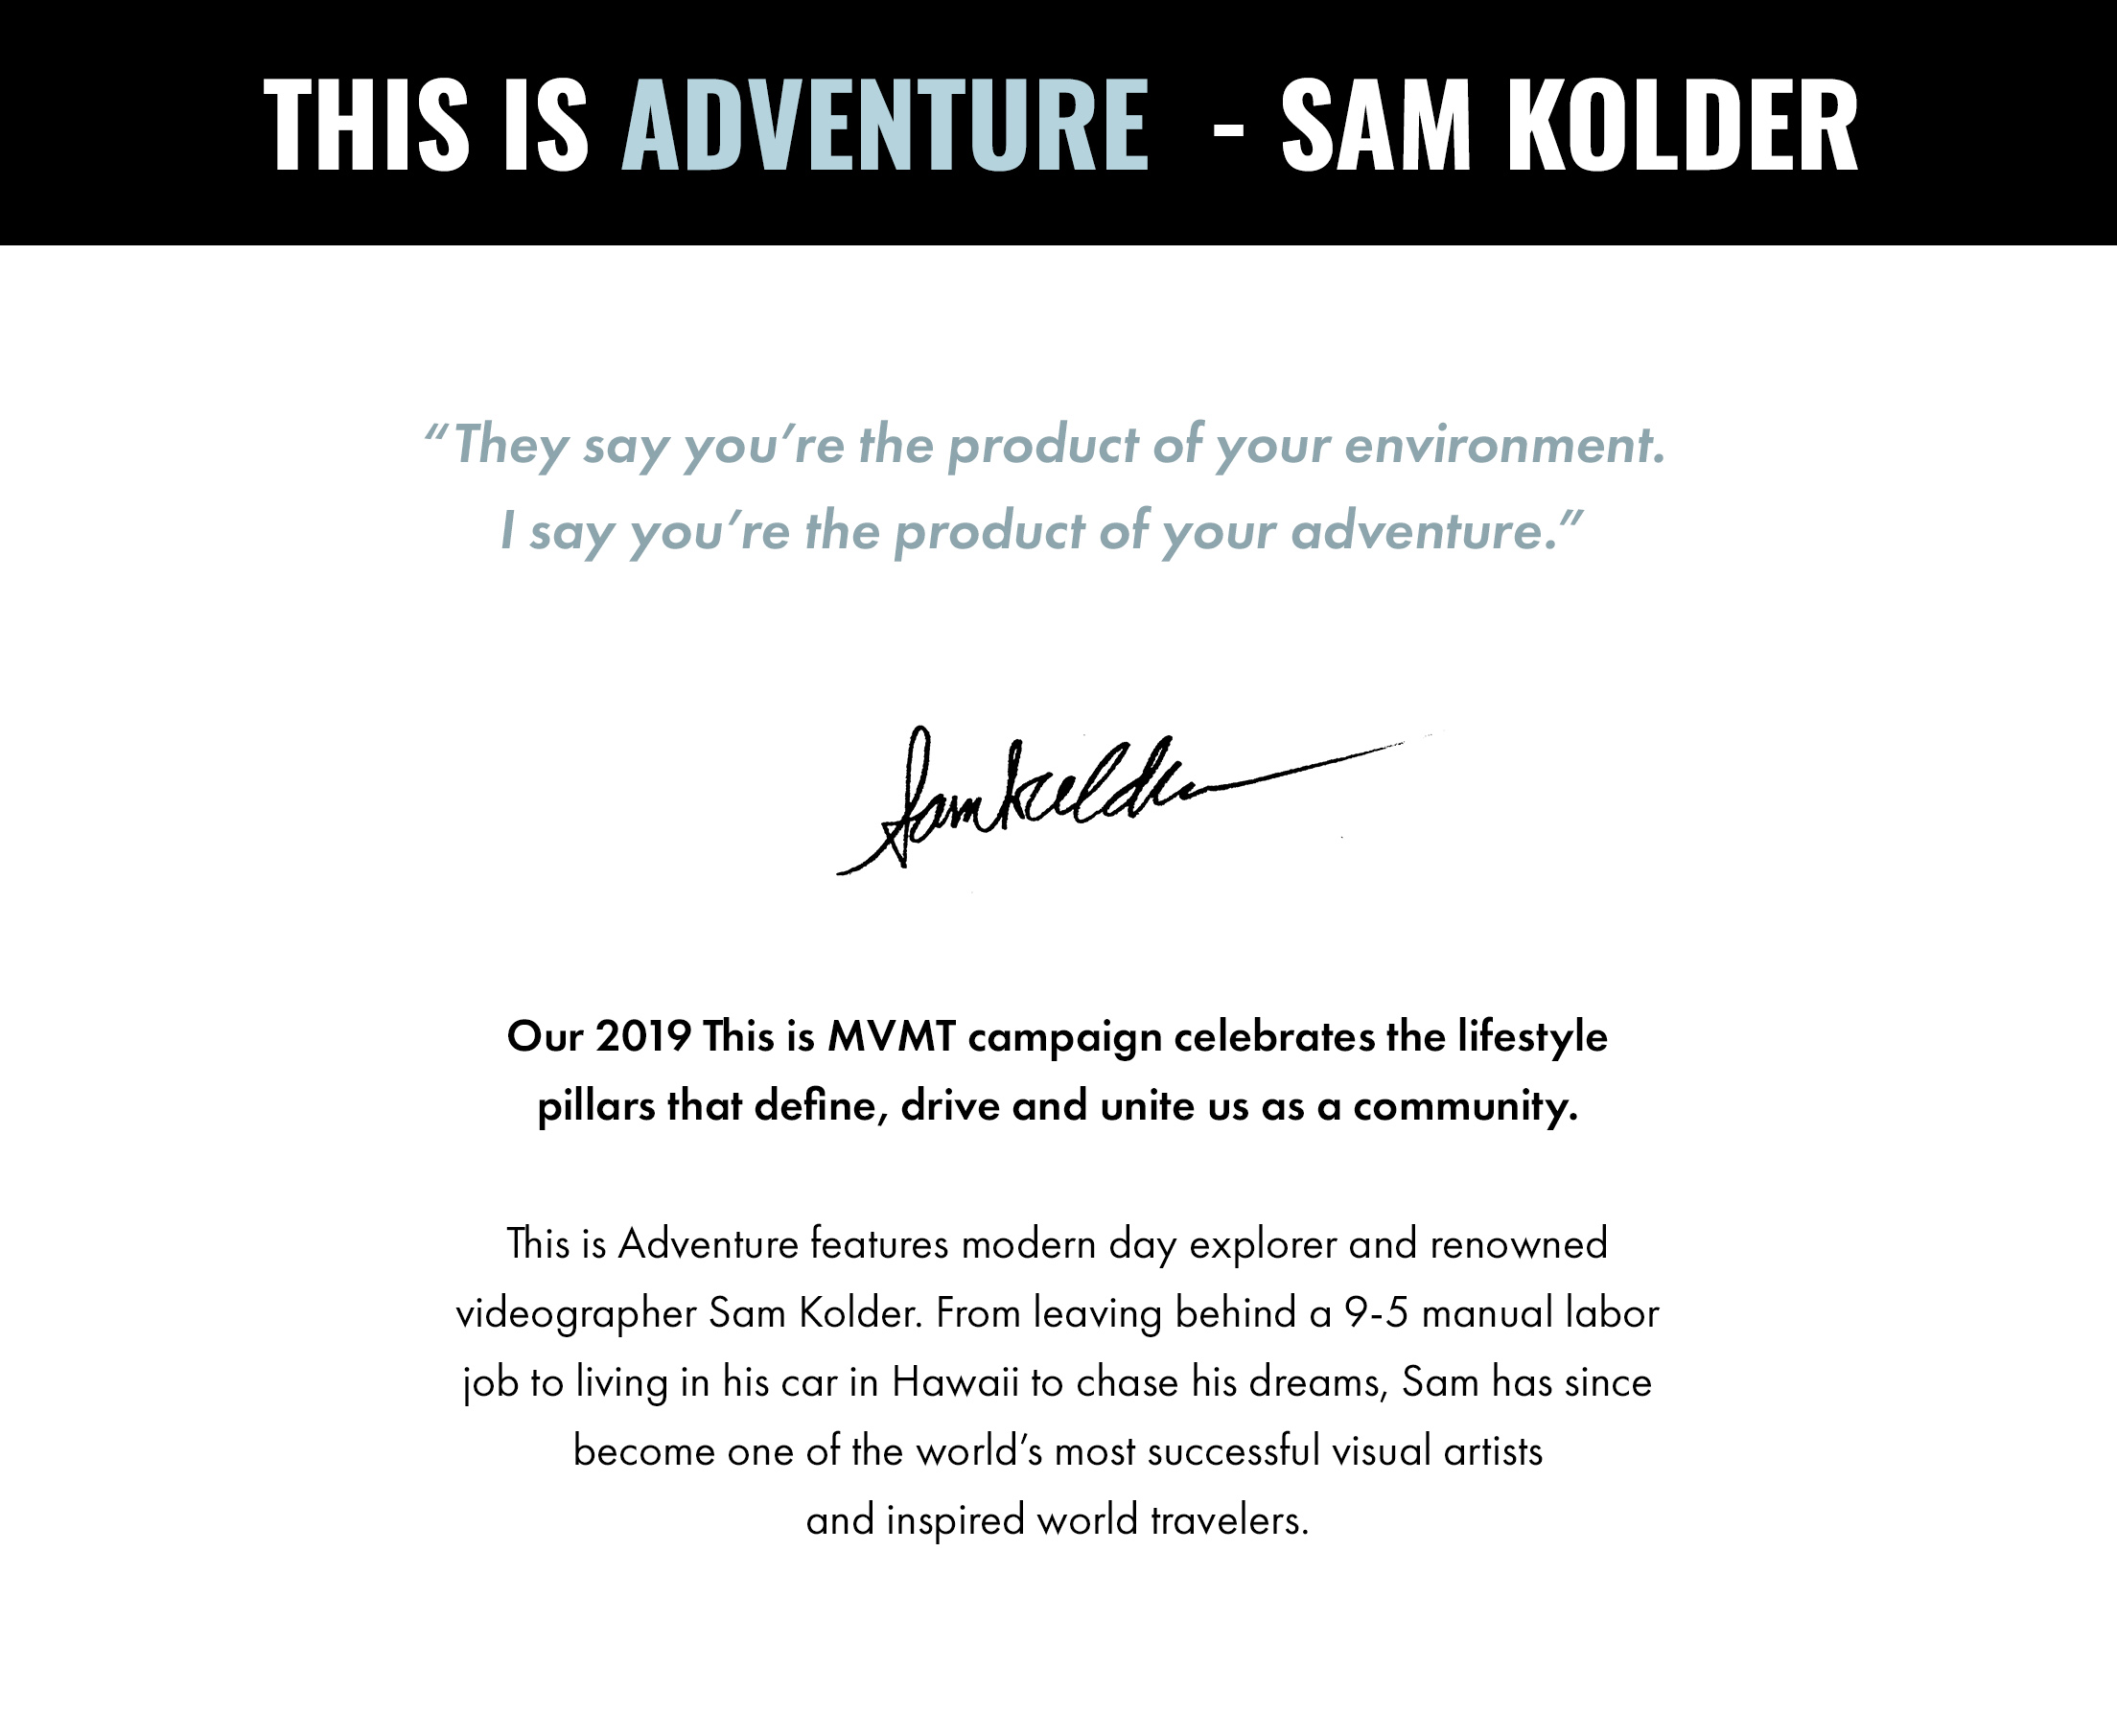 This is Adventure - Sam Kolder. "They say you're the product of your environment. I say you're the product of your adventure." -Sam Kolder. Our 2019 This is MVMT campaign celebrates the lifestyle pillars that define, drive and unite us as a community. This is Adventure features modern day explorer and renowned videographer Sam Kolder. From leaving behind a 9-5 manual labor job to living in his car in Hawaii to chase his dreams, Sam has since become one of the world's most successful visual artists and inspired world travelers.